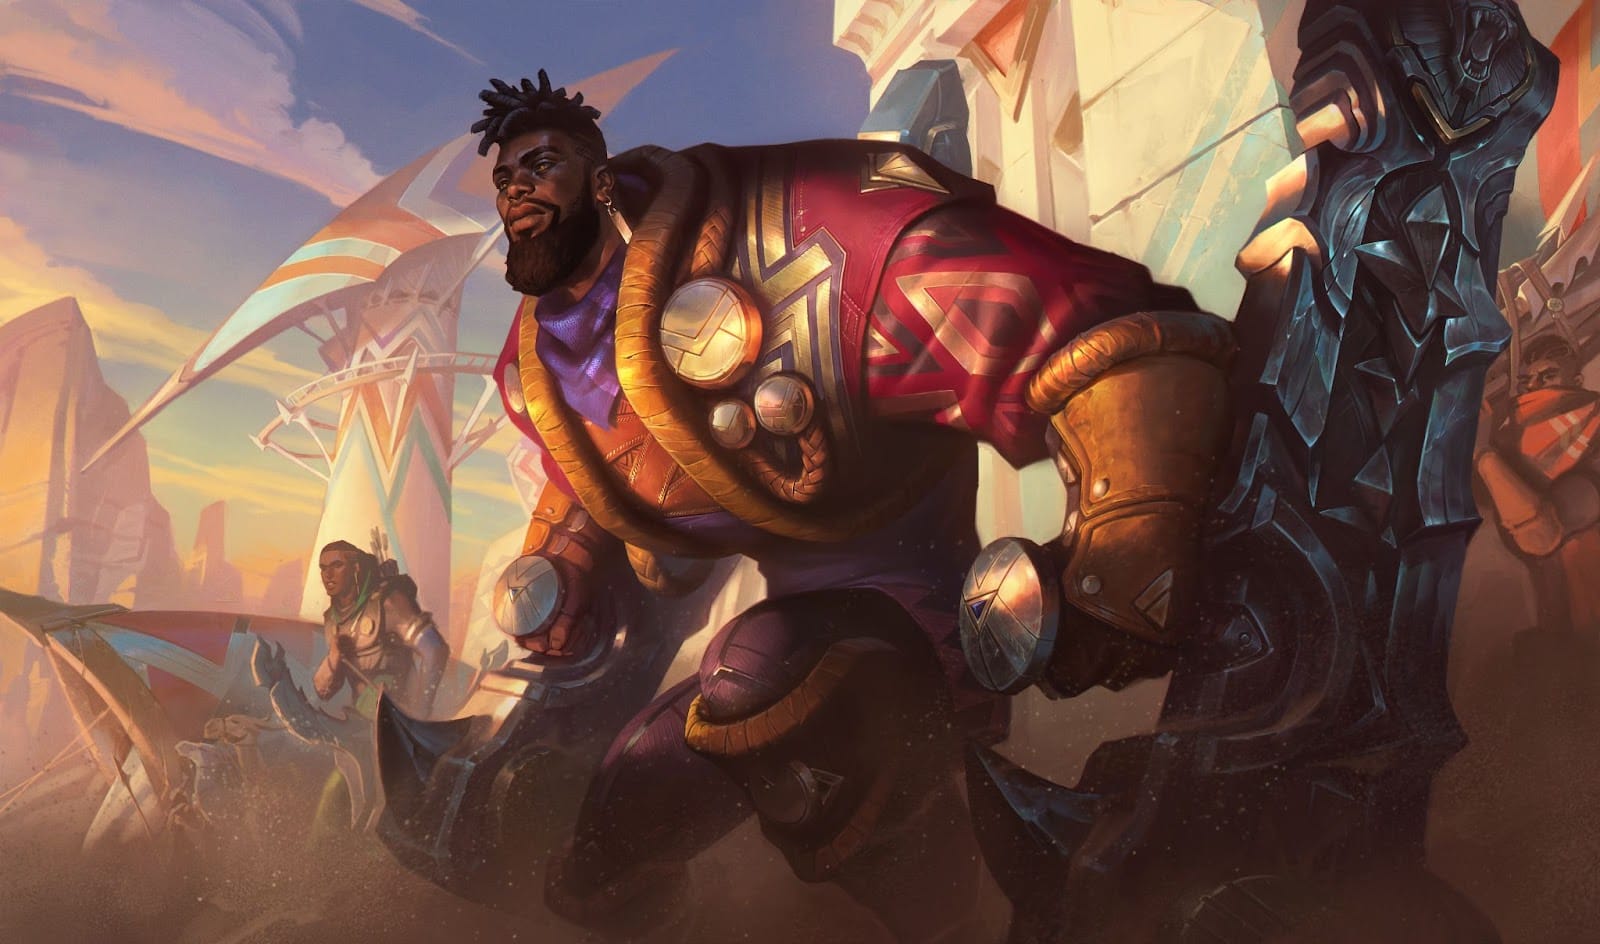 LIL NAS X TAKES OVER AS PRESIDENT OF LEAGUE OF LEGENDS